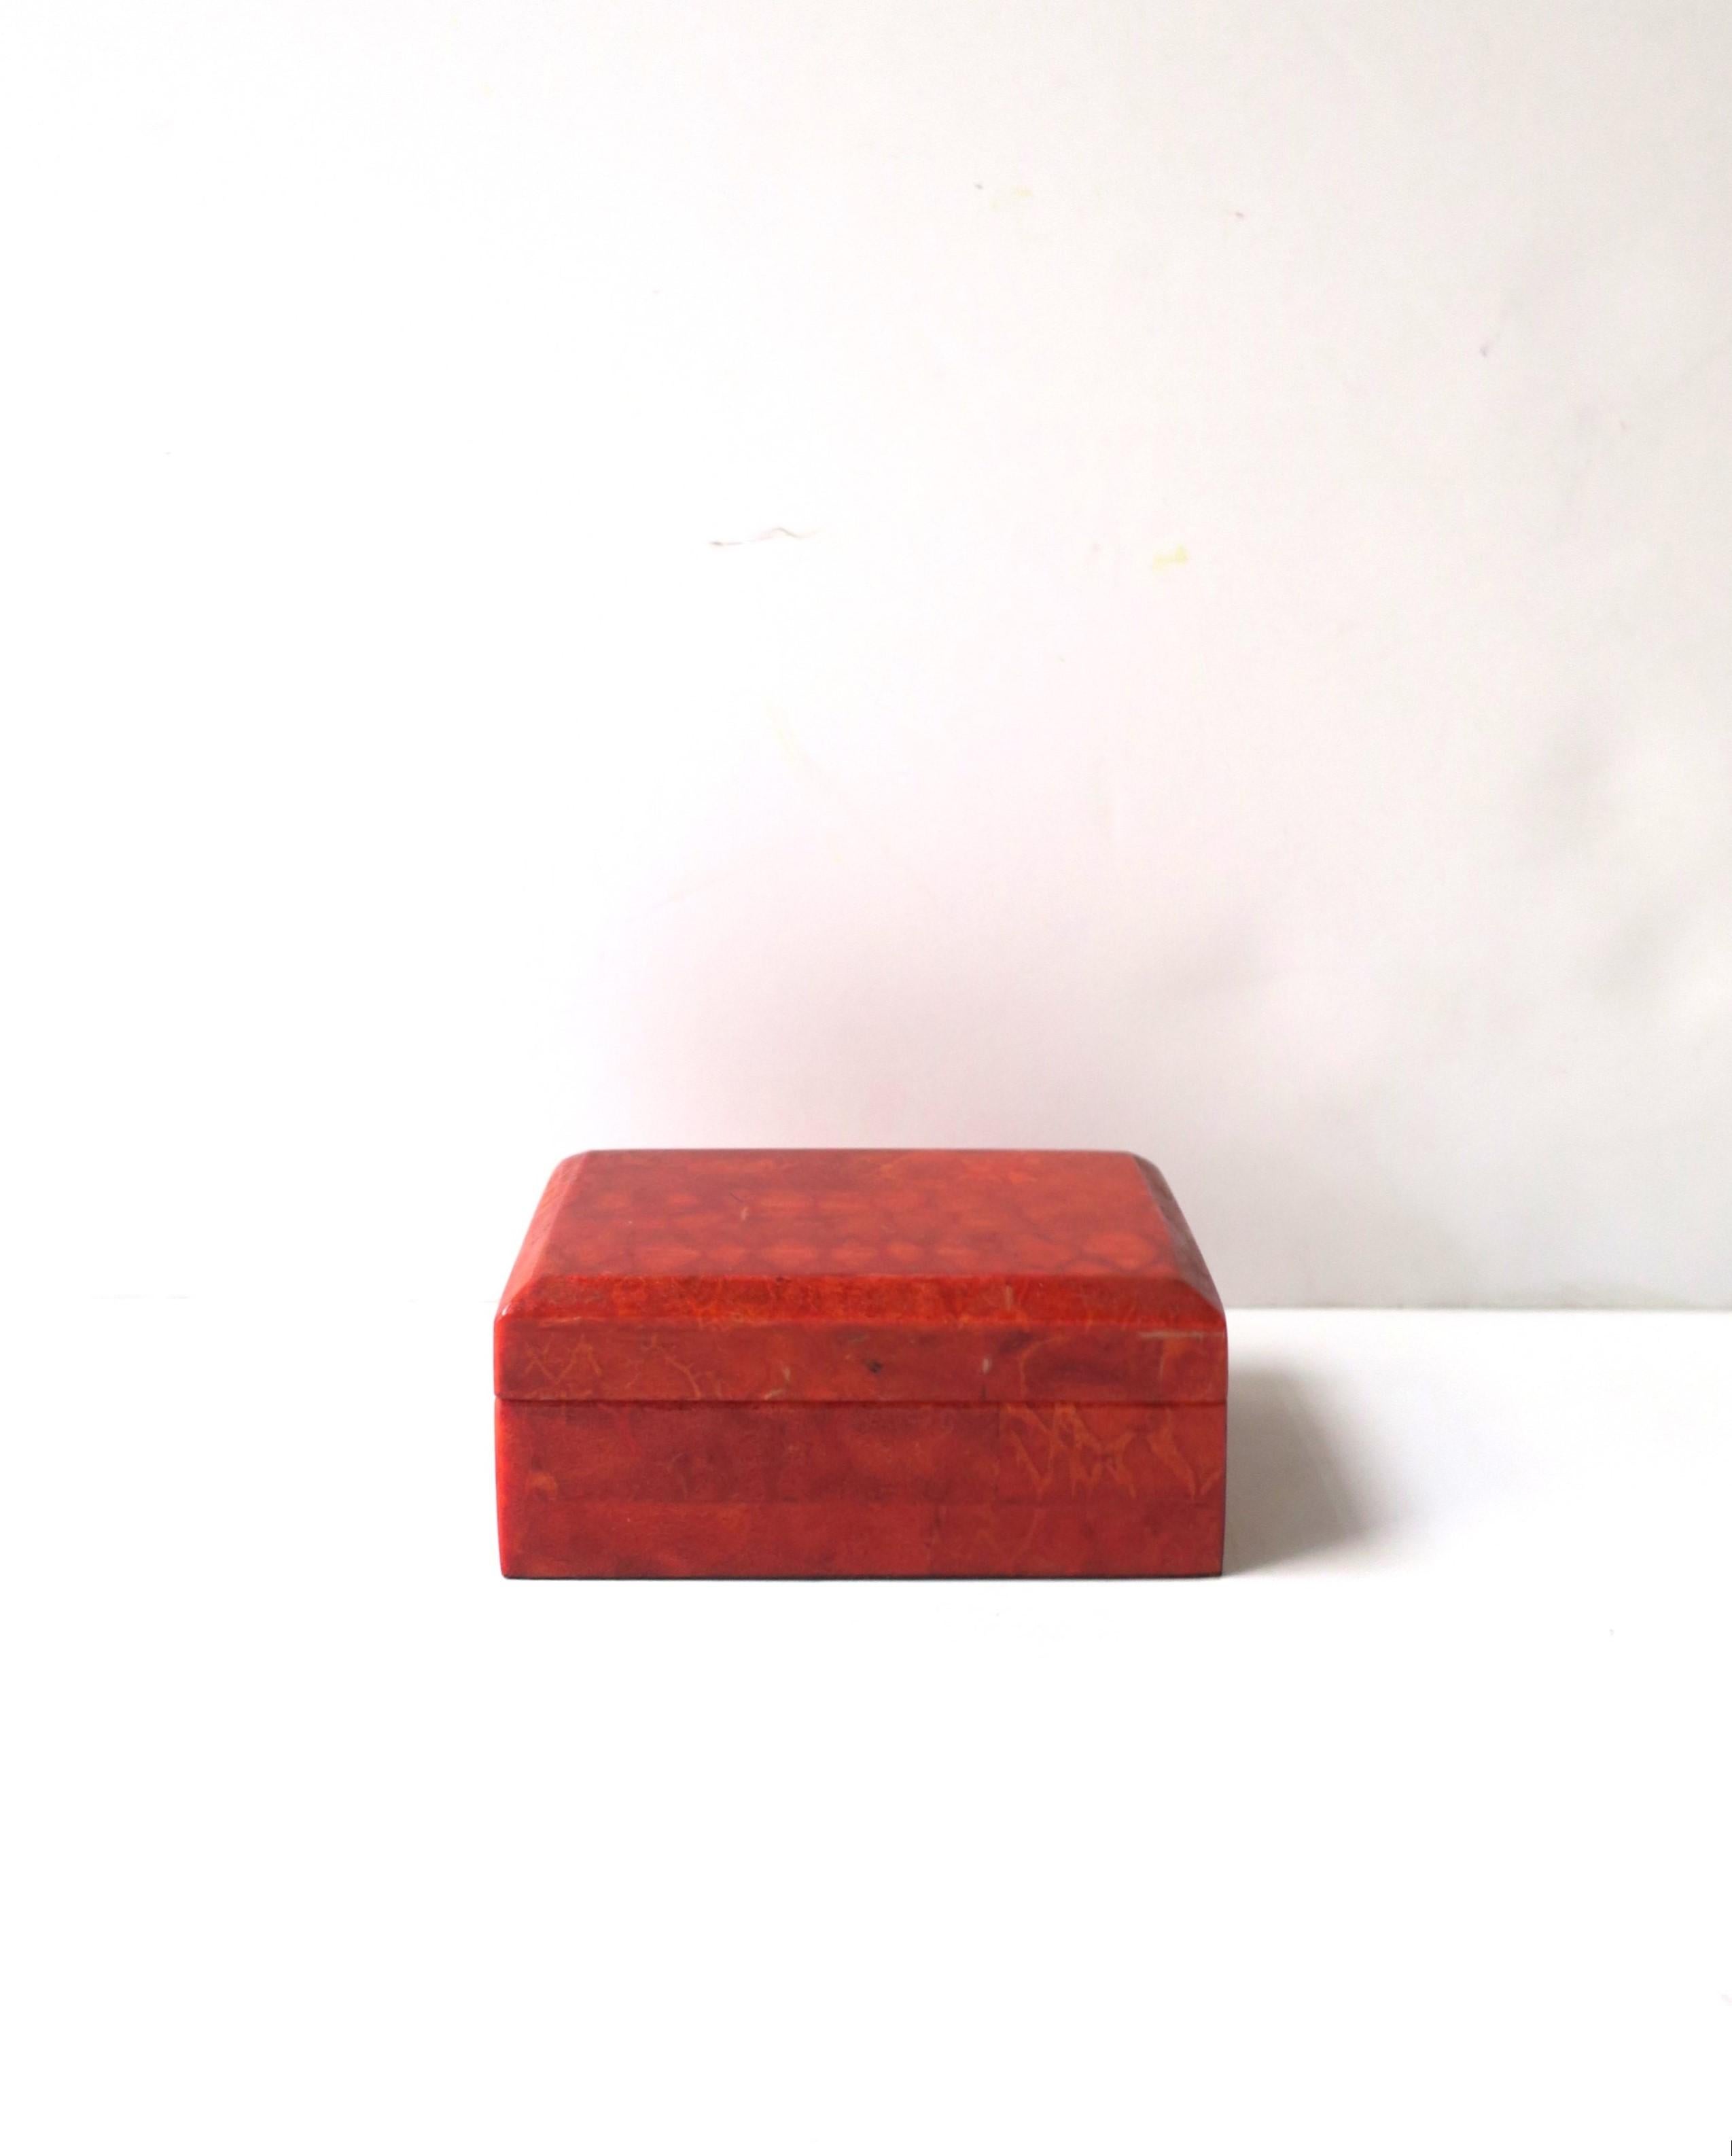 A small red resin laminate over wood jewelry box. A convenient box for holding jewelry (as demonstrated) or other small items on desk, vanity, bedside table, dresser, on top of books, etc. Many uses. A great red hue offering a pop of color to any